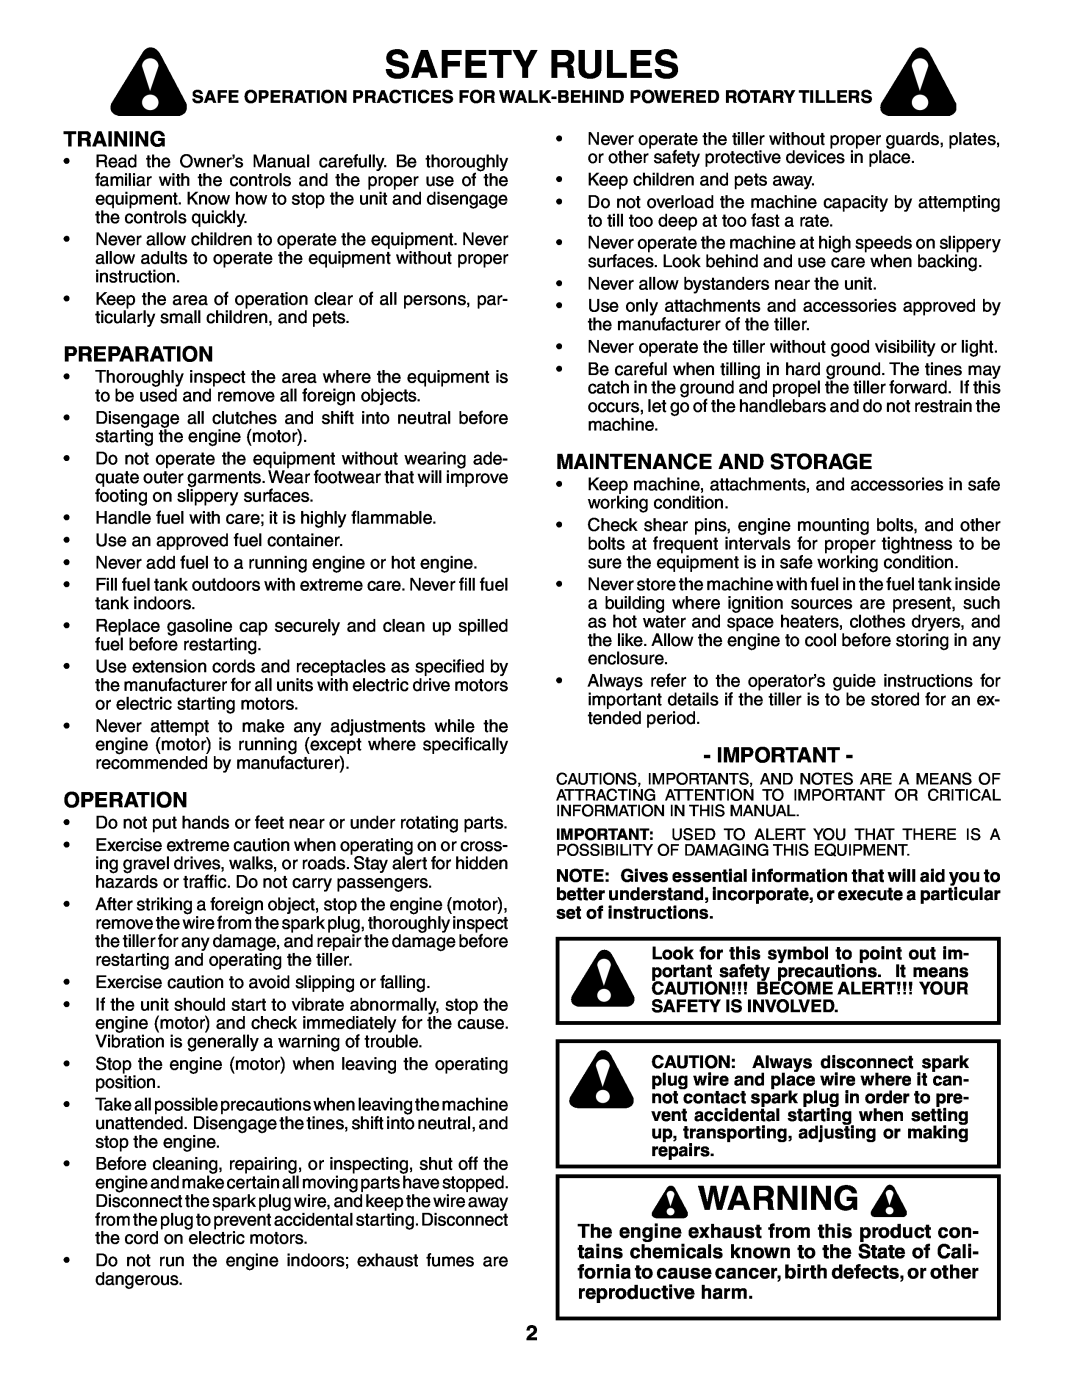 Electrolux FN620K owner manual Safety Rules, Training, Preparation, Operation, Maintenance And Storage 